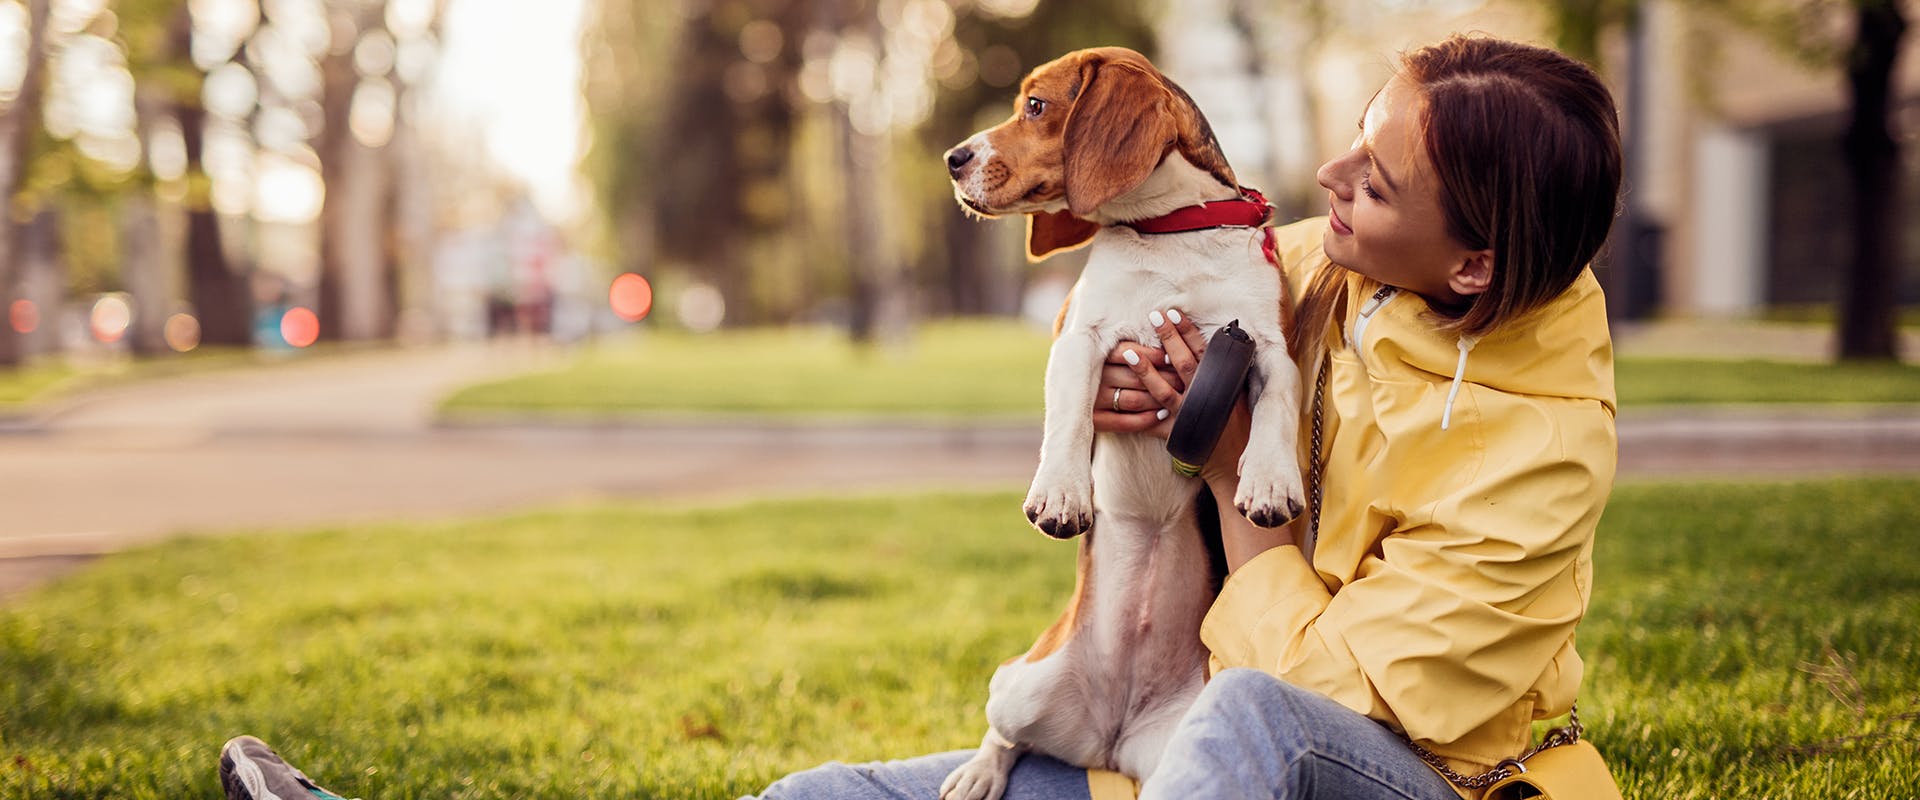 A woman sitting in a park, holding a Beagle dog in her arms